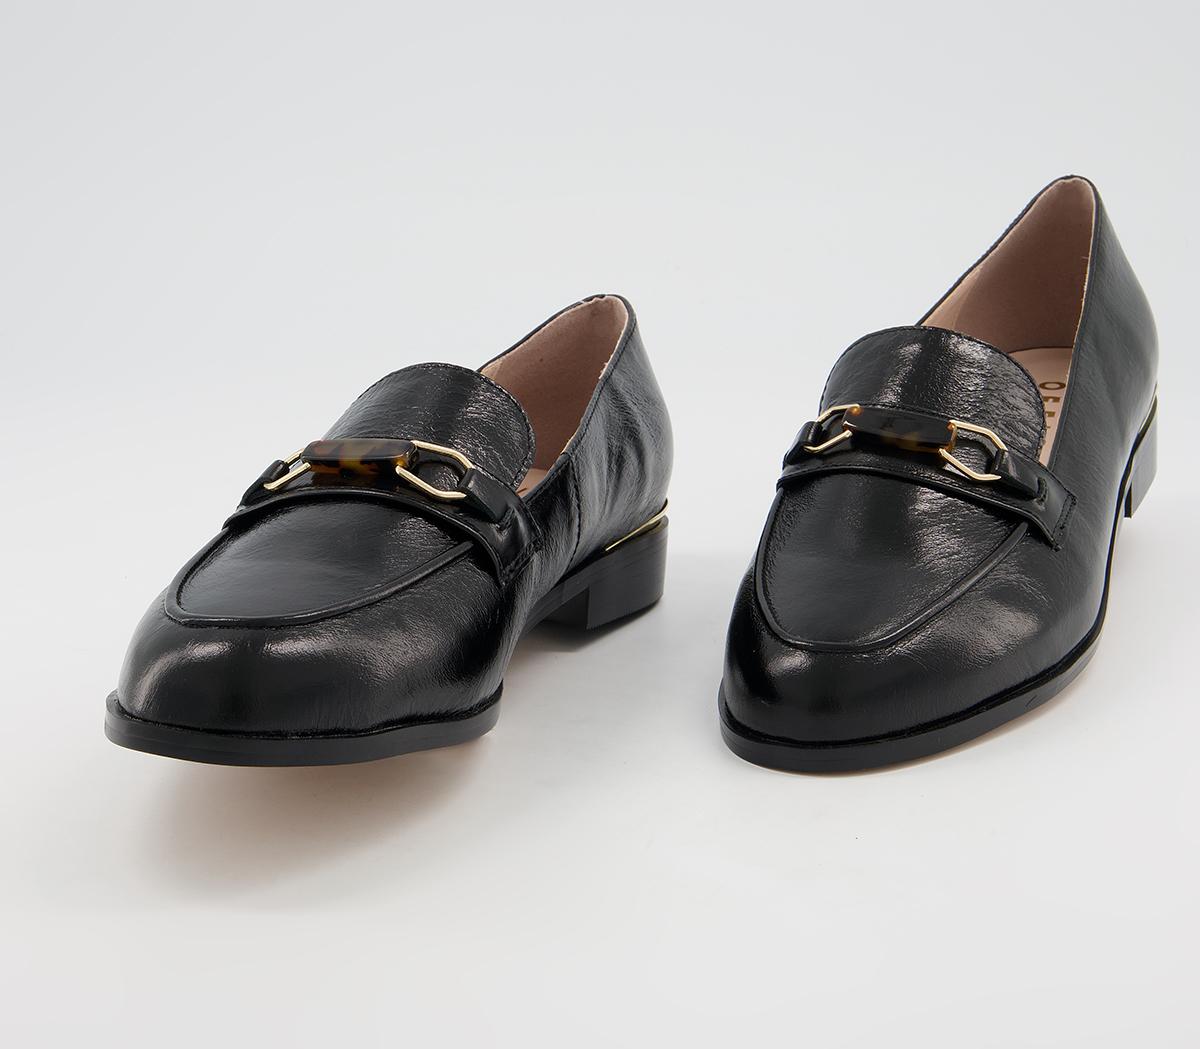 OFFICE First Hand Snaffle Trim Loafer Shoes Black Leather - Flat Shoes ...